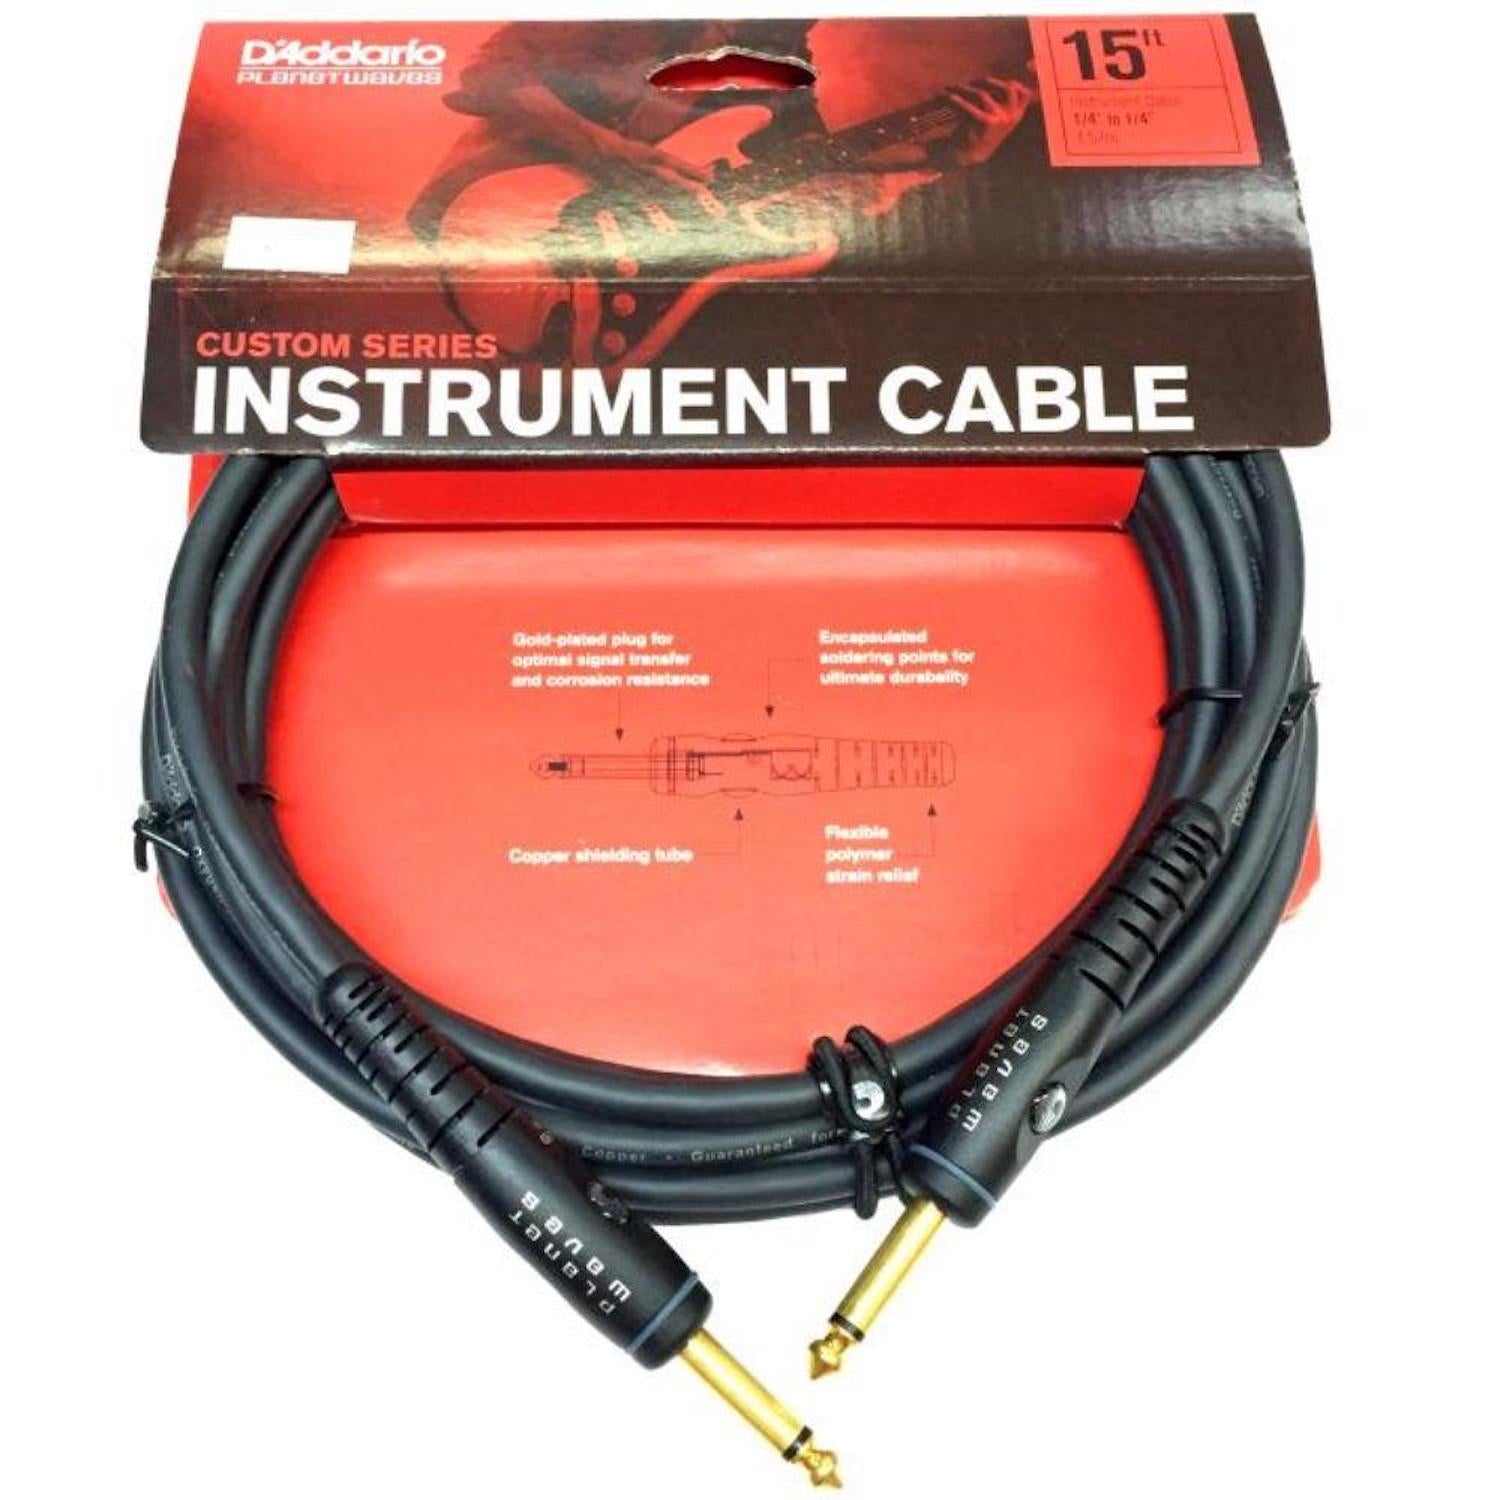 D'Addario Planet Waves Custom Series Instrument Cable 15'